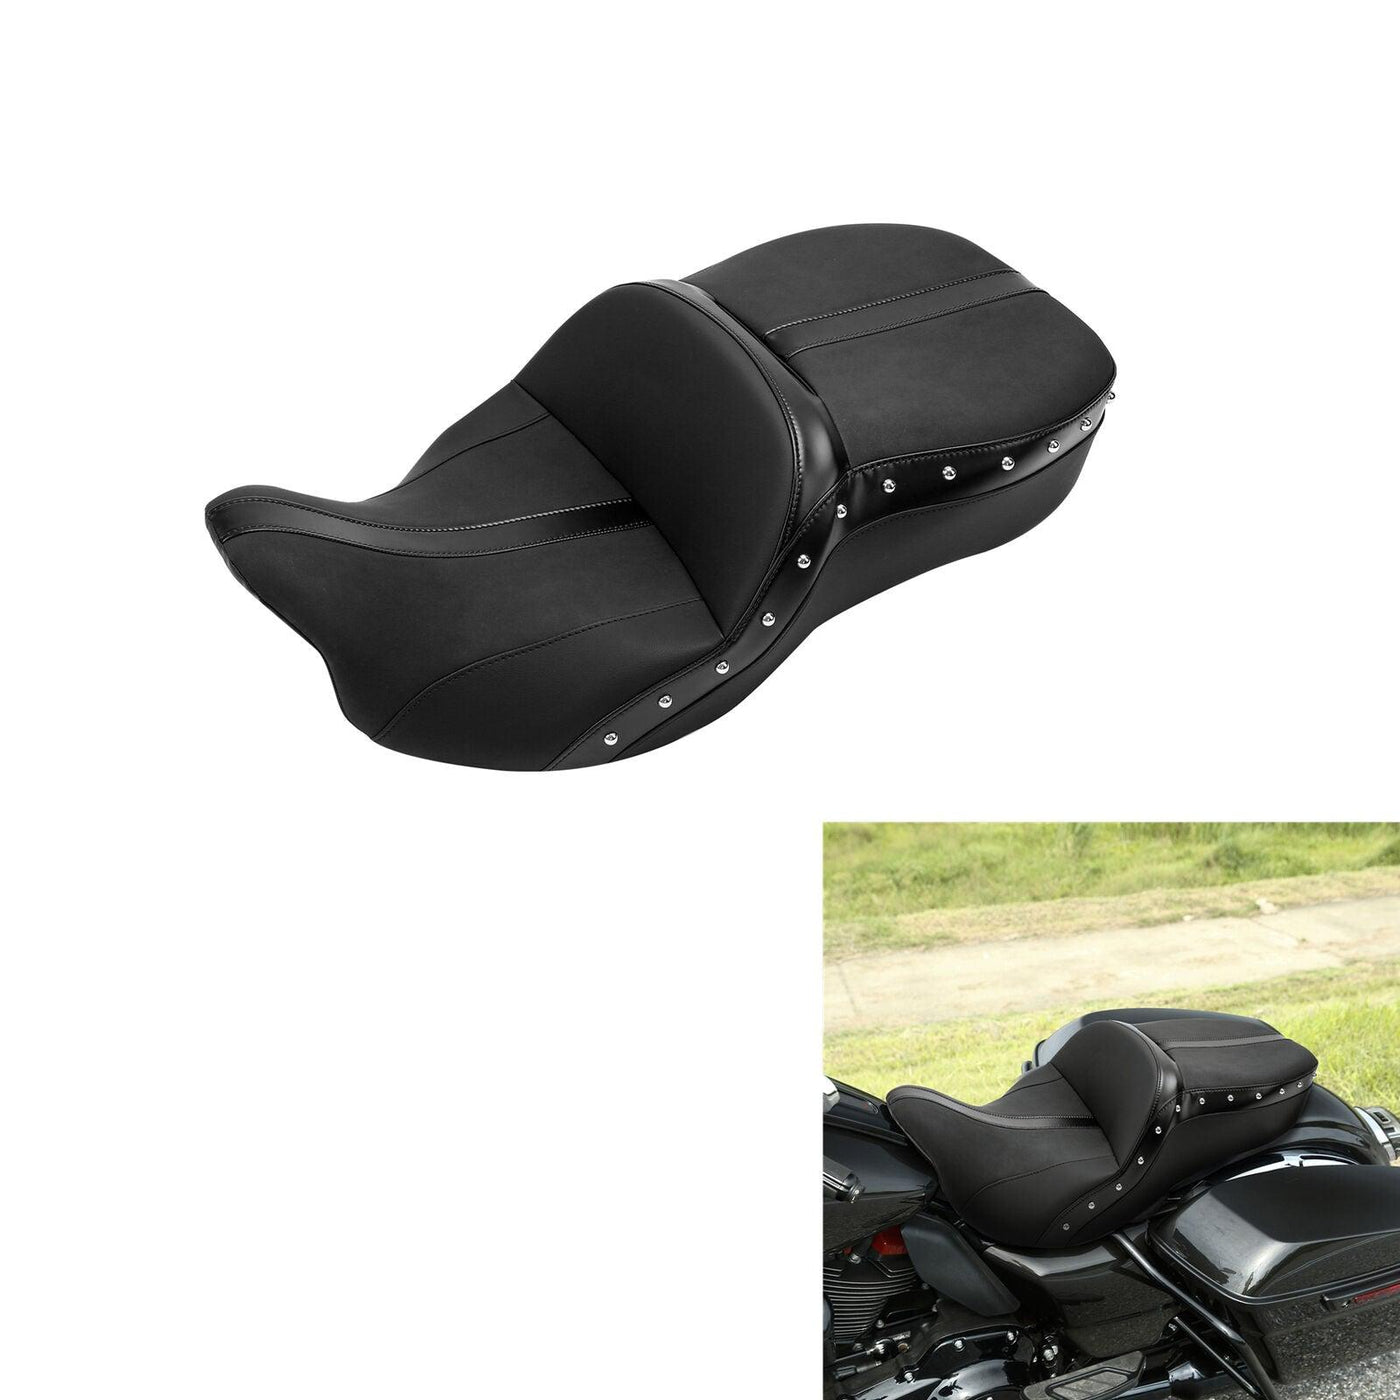 Driver Rider Passenger Seat Fit For Harley Touring Road King Road Glide 09-22 17 - Moto Life Products